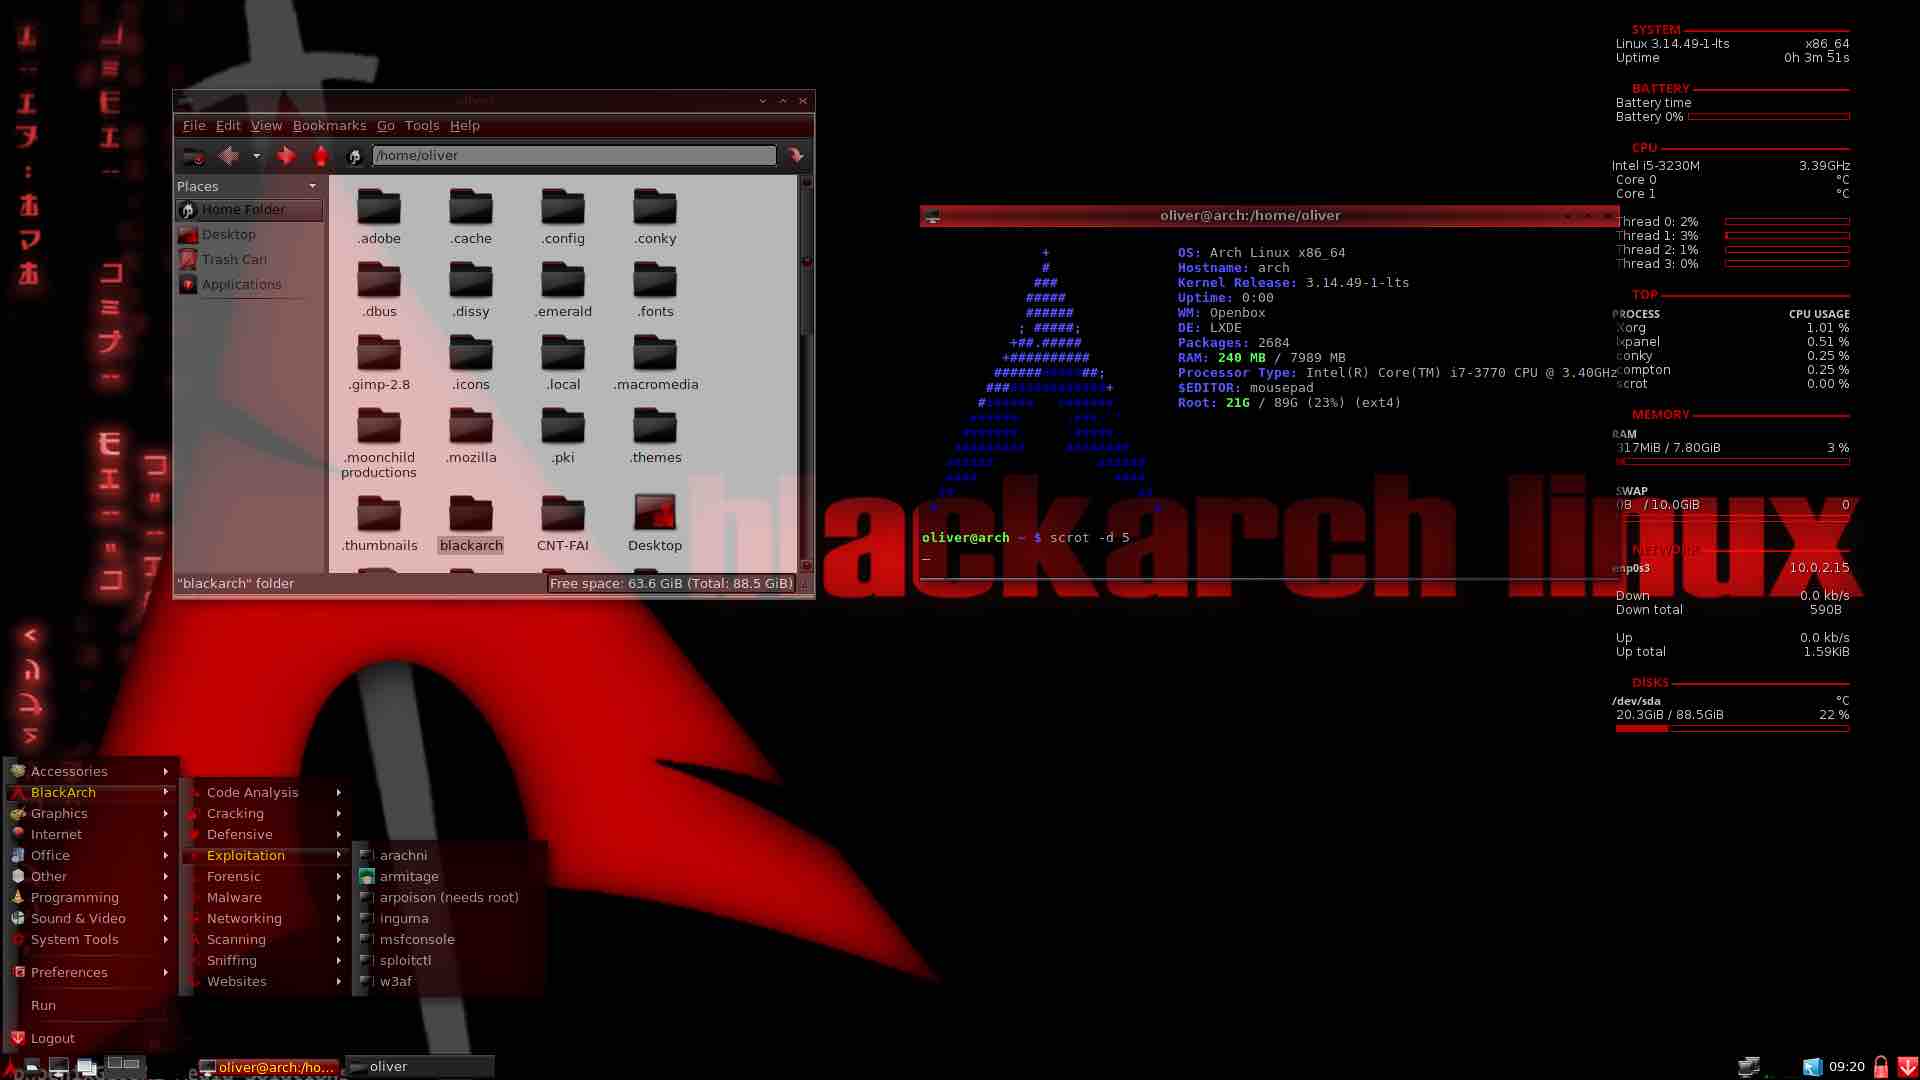 blackarch best hacking distro operating systemblackarch best hacking distro operating system